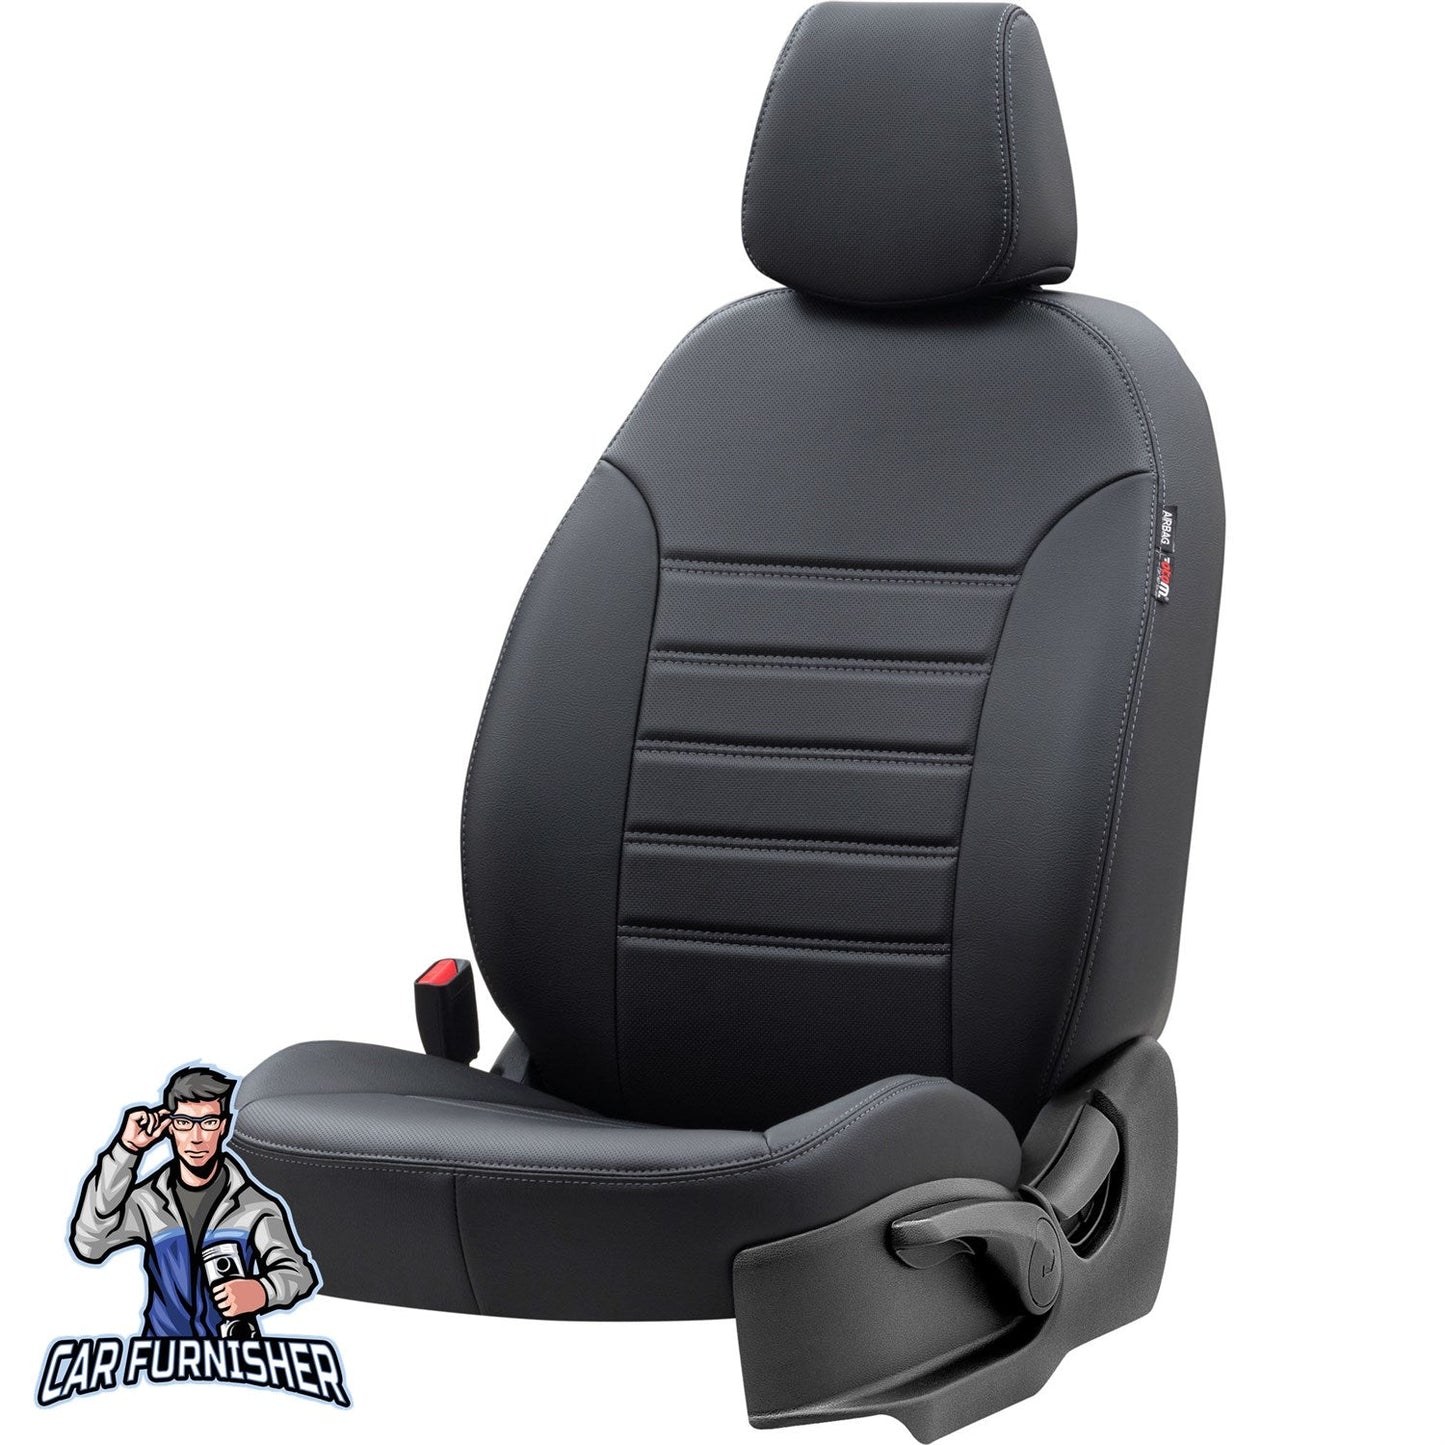 Mitsubishi Outlander Seat Covers Istanbul Leather Design Black Leather